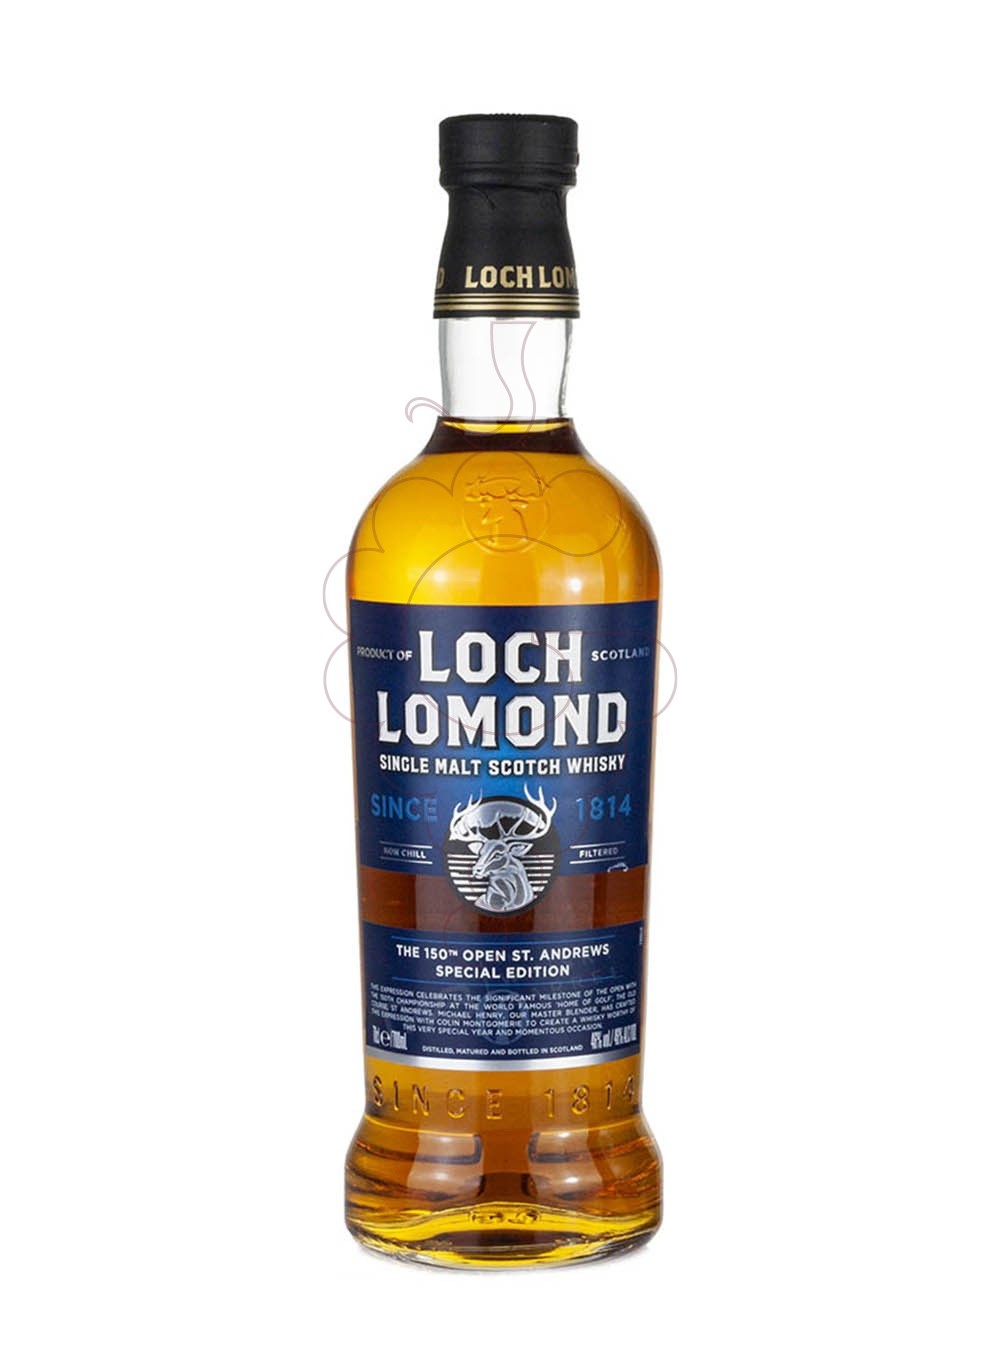 Foto Whisky Loch lomond 150th Open St. Andrews Special Ed.